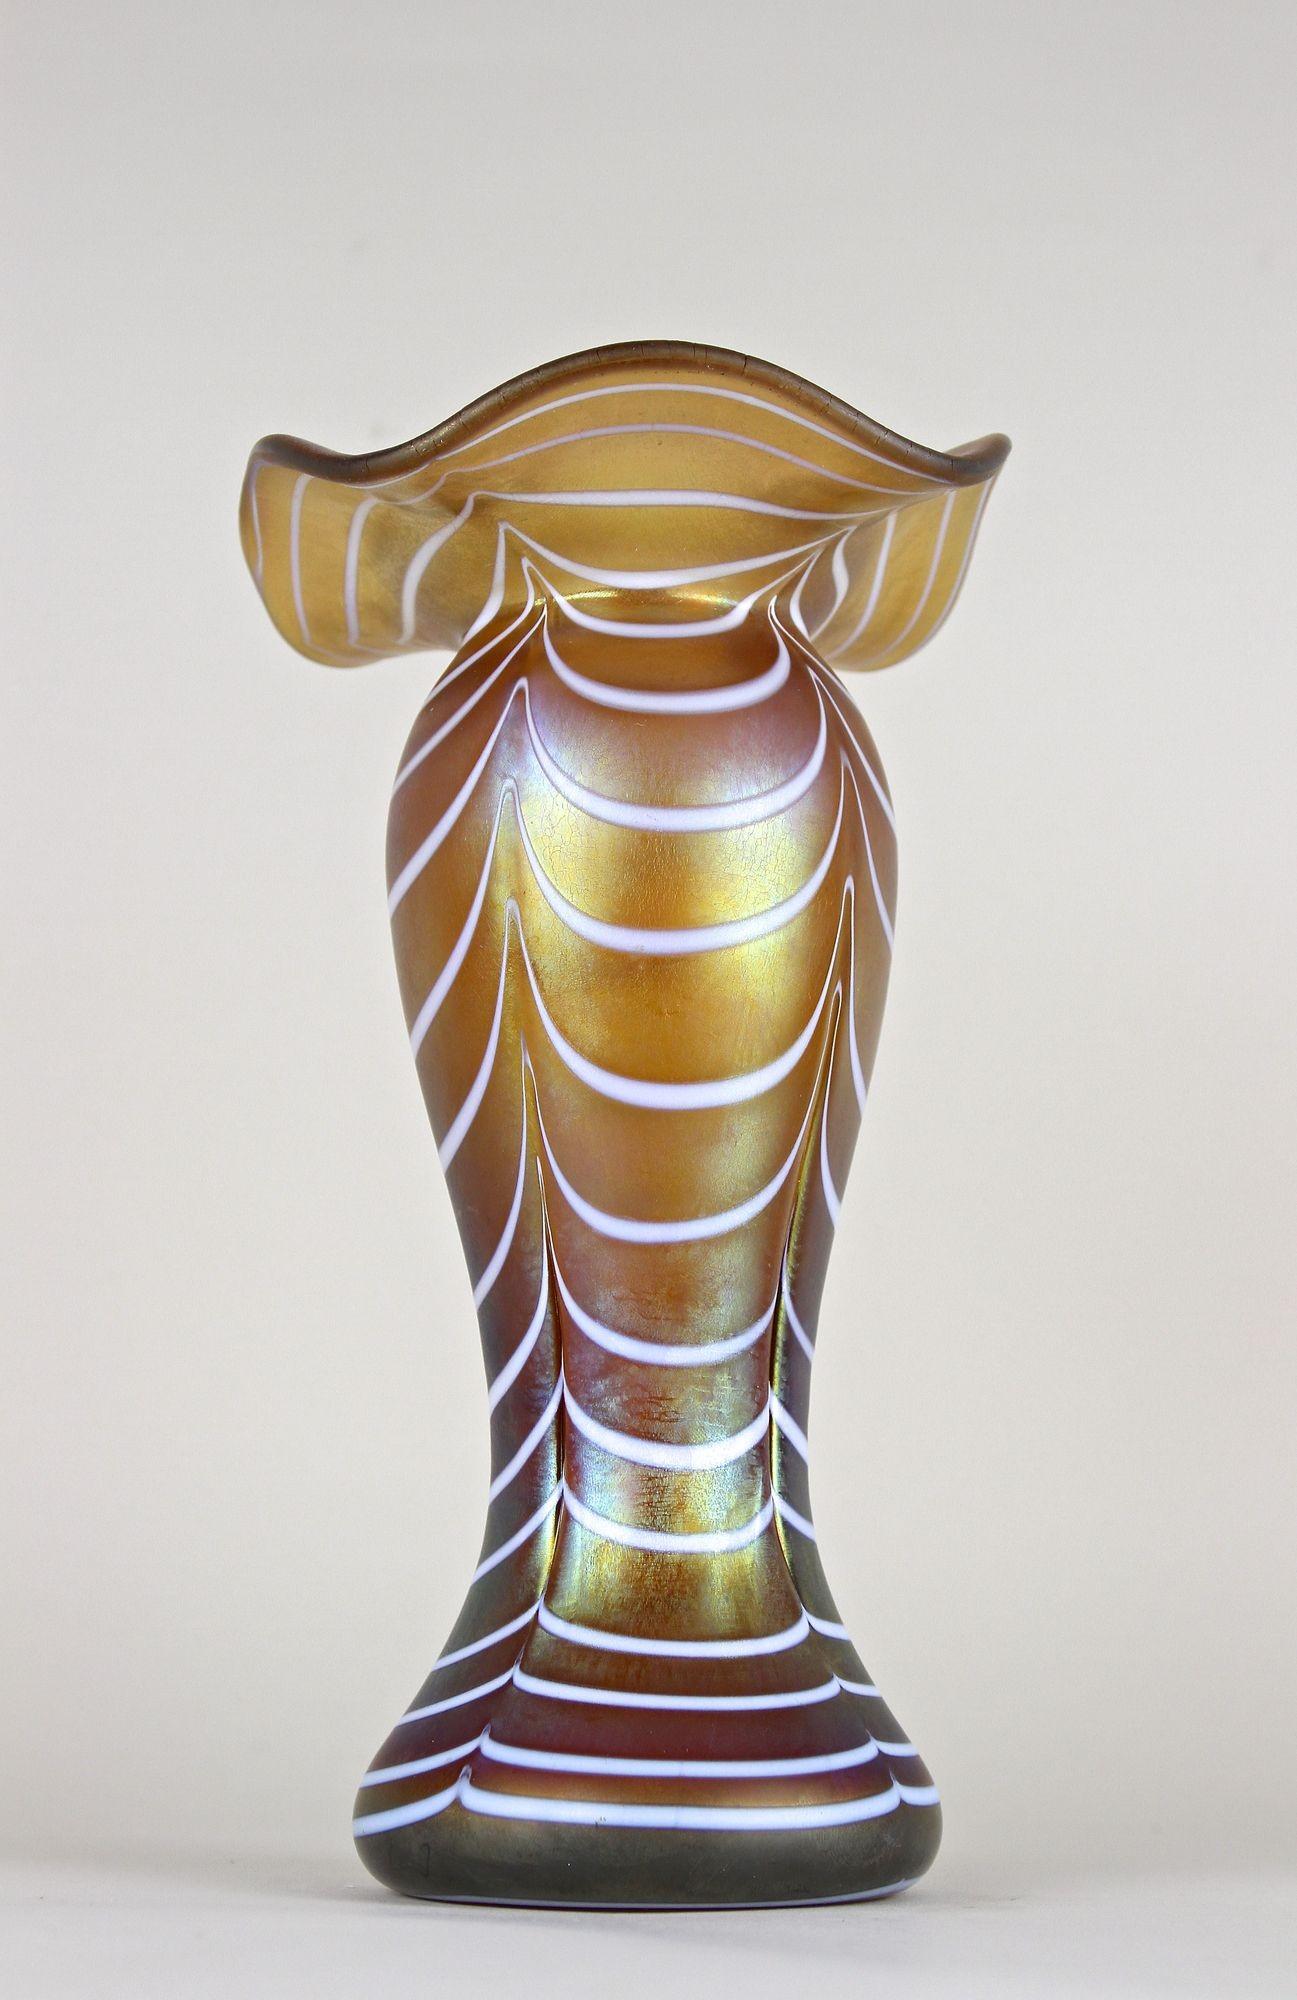 Enchanting, highly decorative iridescent glass vase from the Art Nouveau period in Bohemia around 1915. A truly beautiful piece of glass art from the early 20th century, attributed to Loetz Witwe. An extraordinary design with a lovely amber/brown